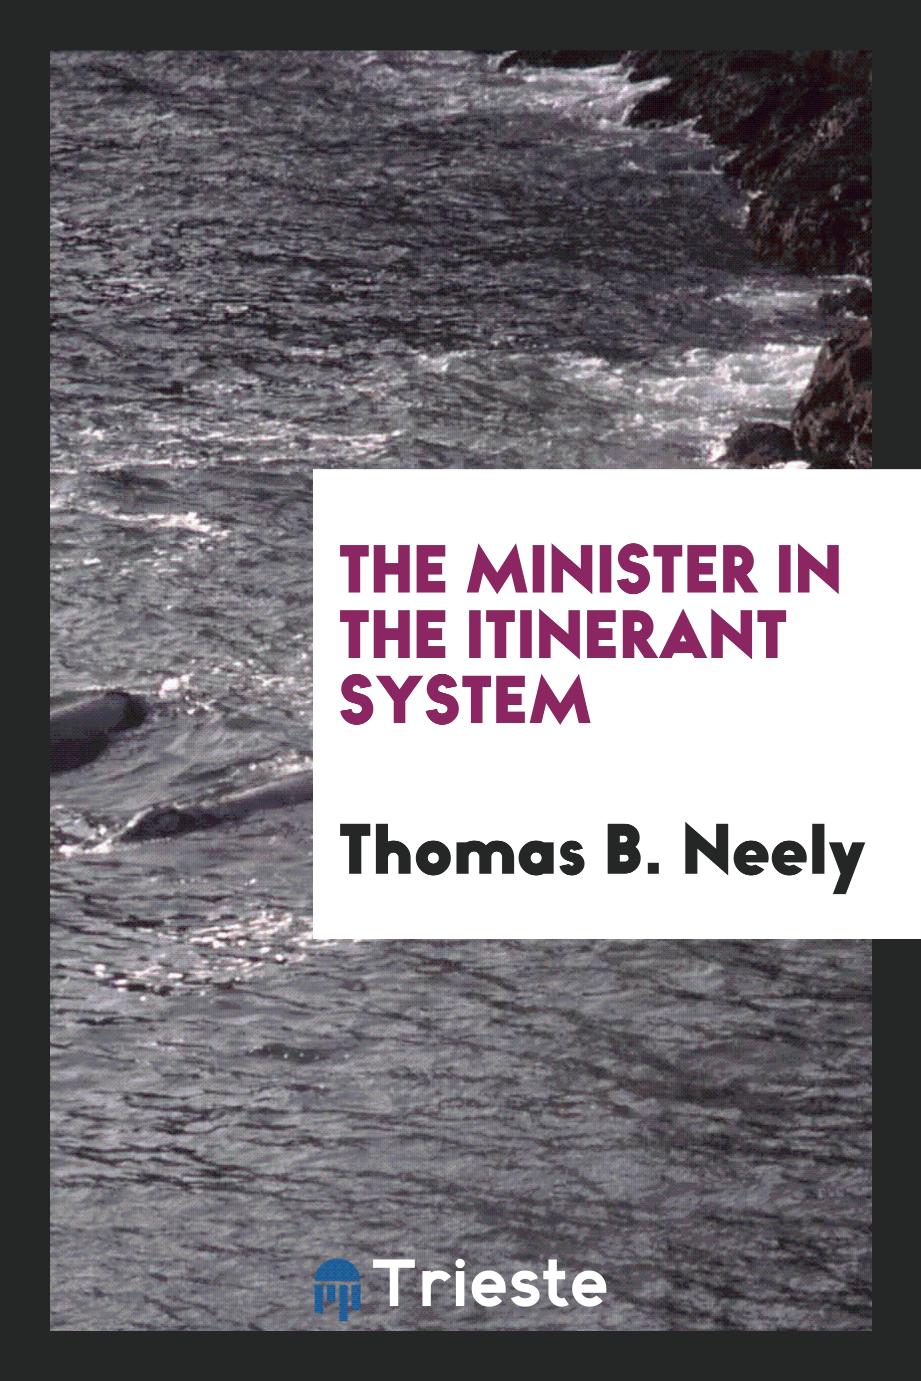 The Minister in the Itinerant System